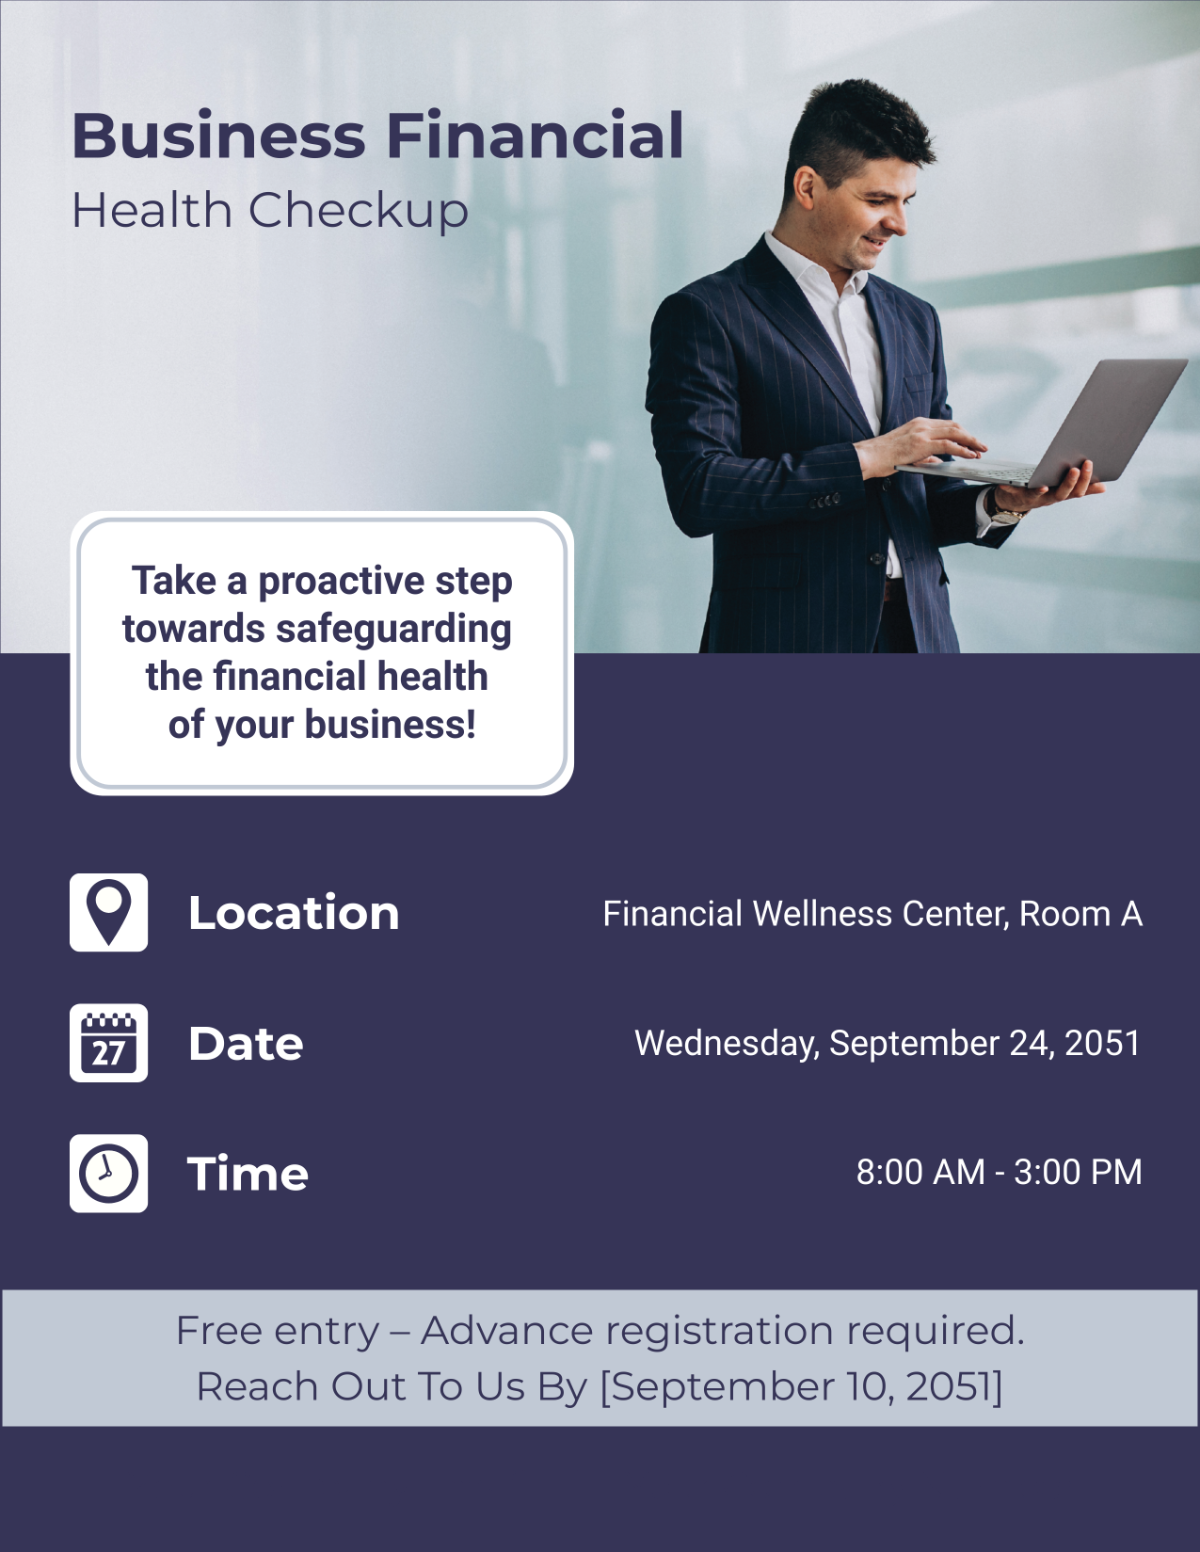 Business Financial Health Checkup Flyer